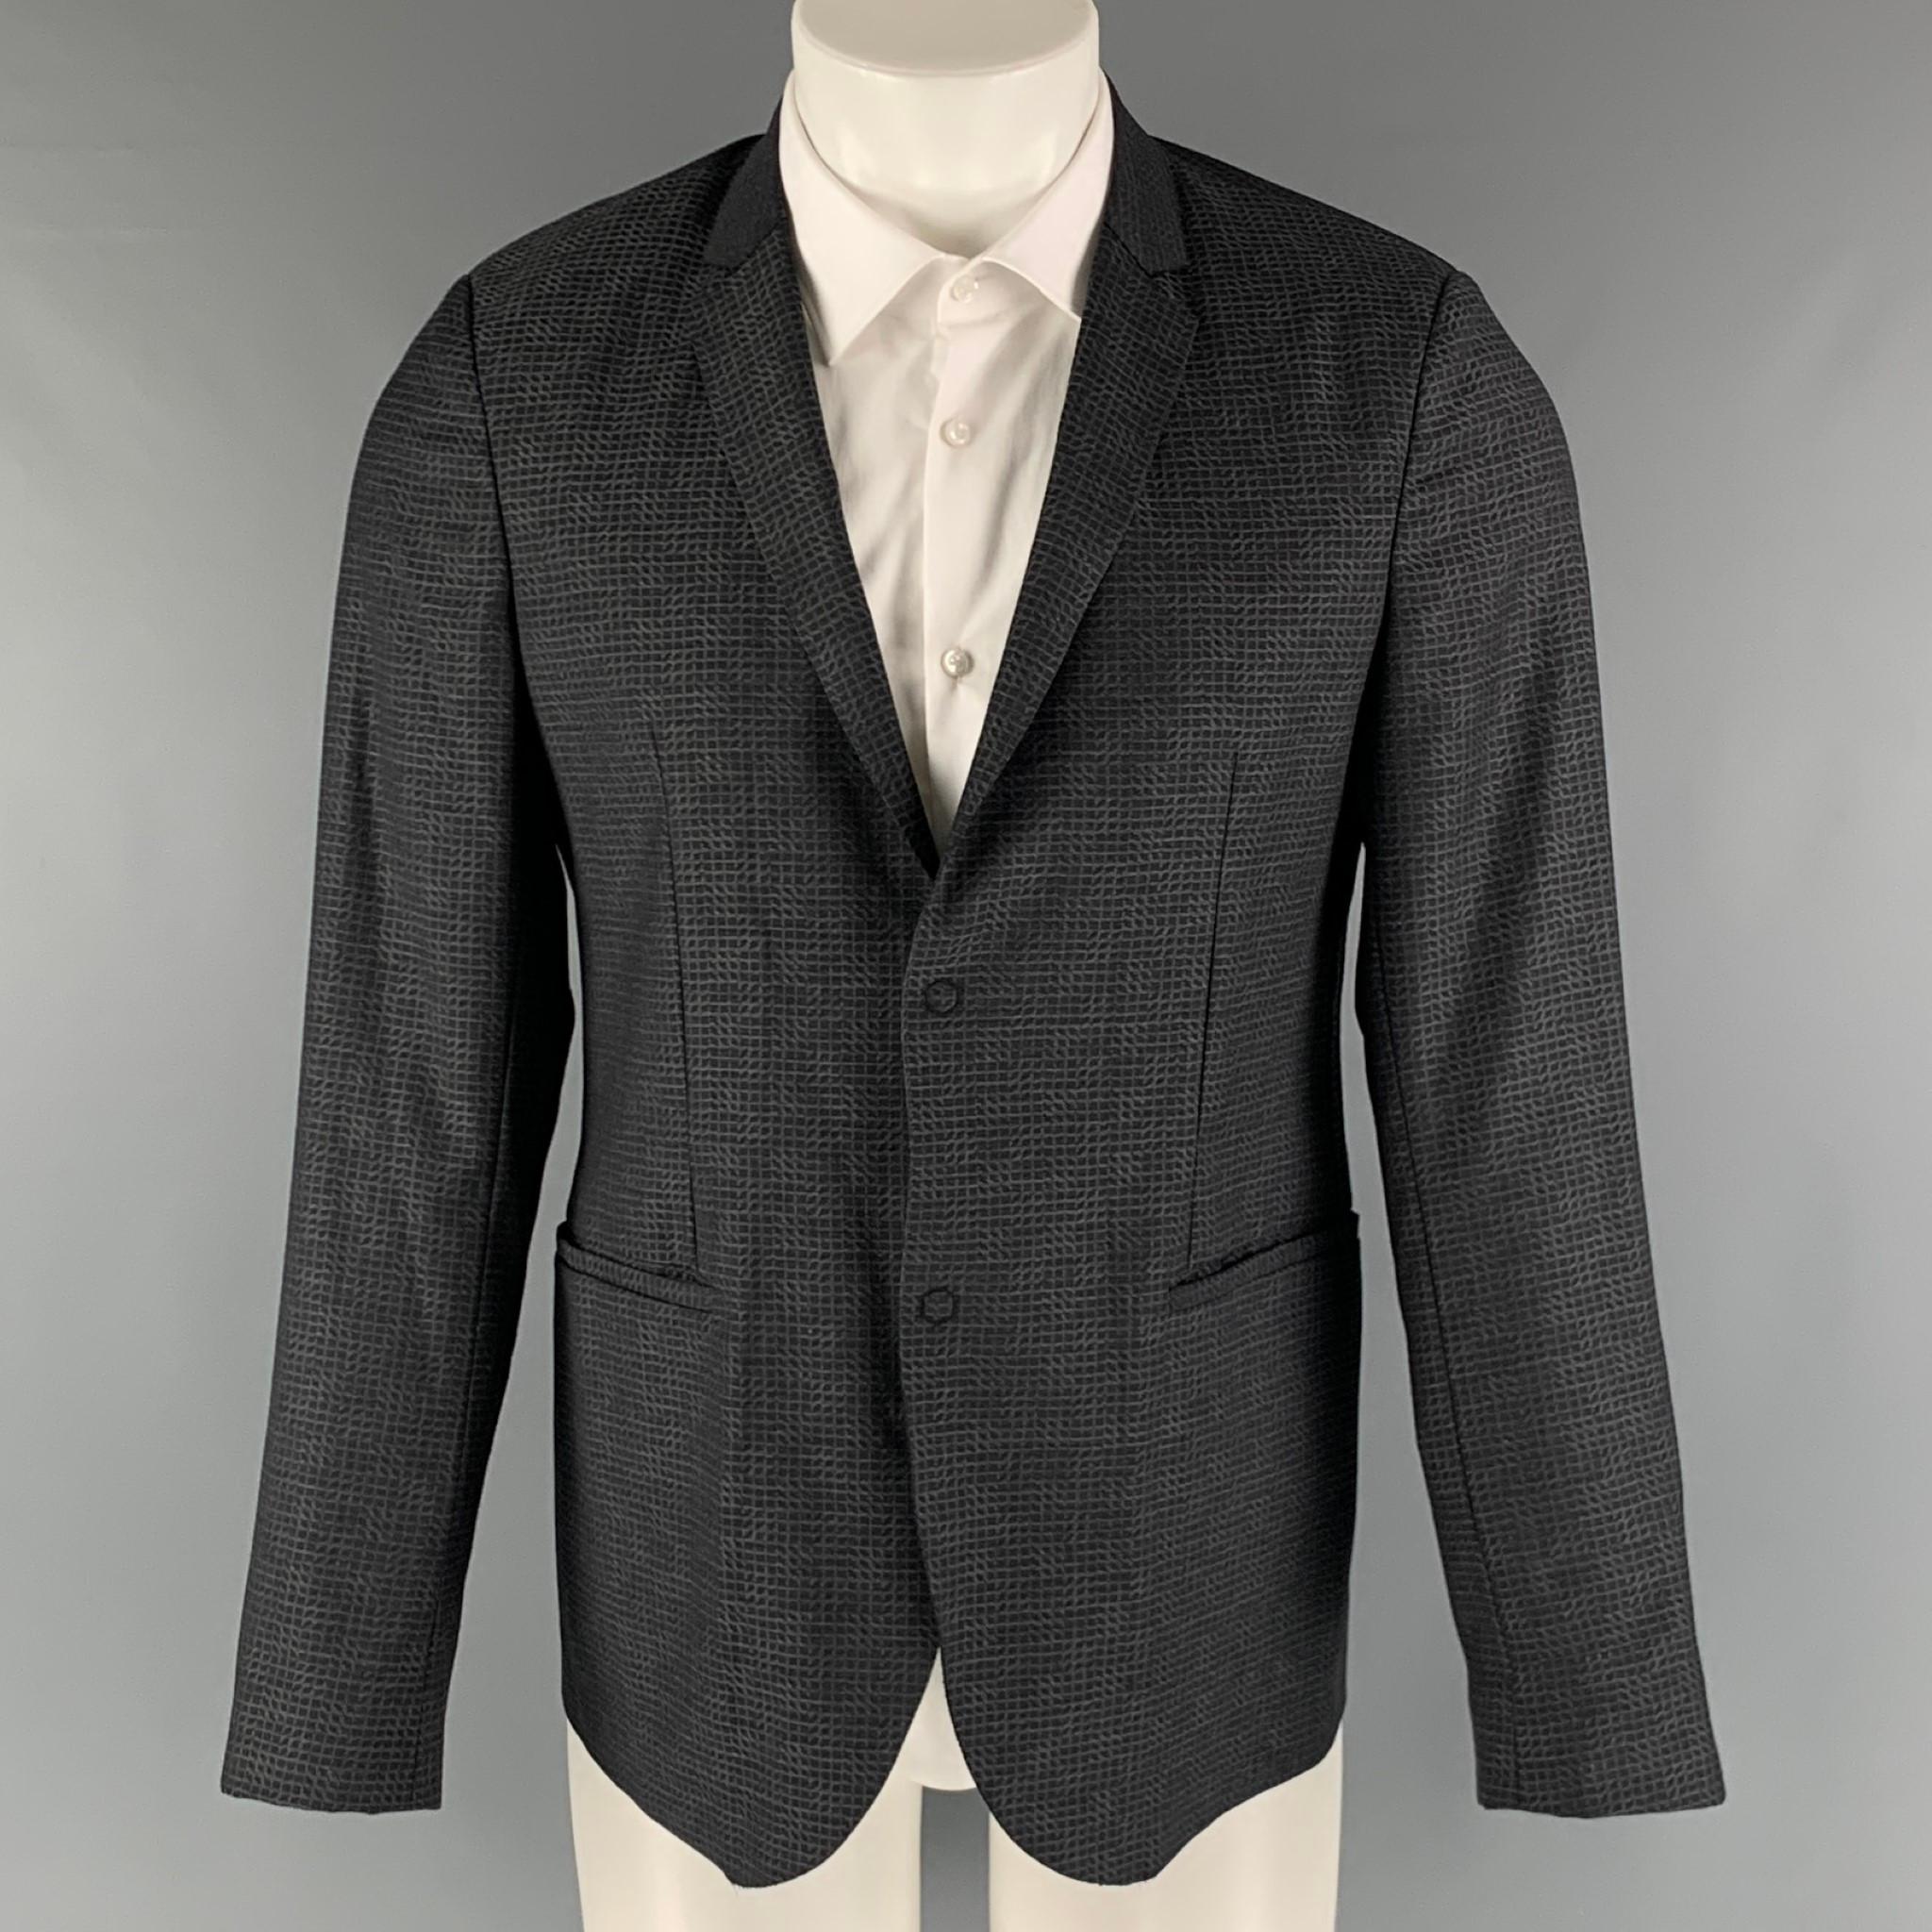 EMPORIO ARMANI sport coat comes in a charcoal and grey wool woven material no lining featuring a notch lapel, welt pockets, and a two snap button closure. Made in Italy.

Excellent Pre-Owned Condition.
Marked: 48

Measurements:

Shoulder: 16.5